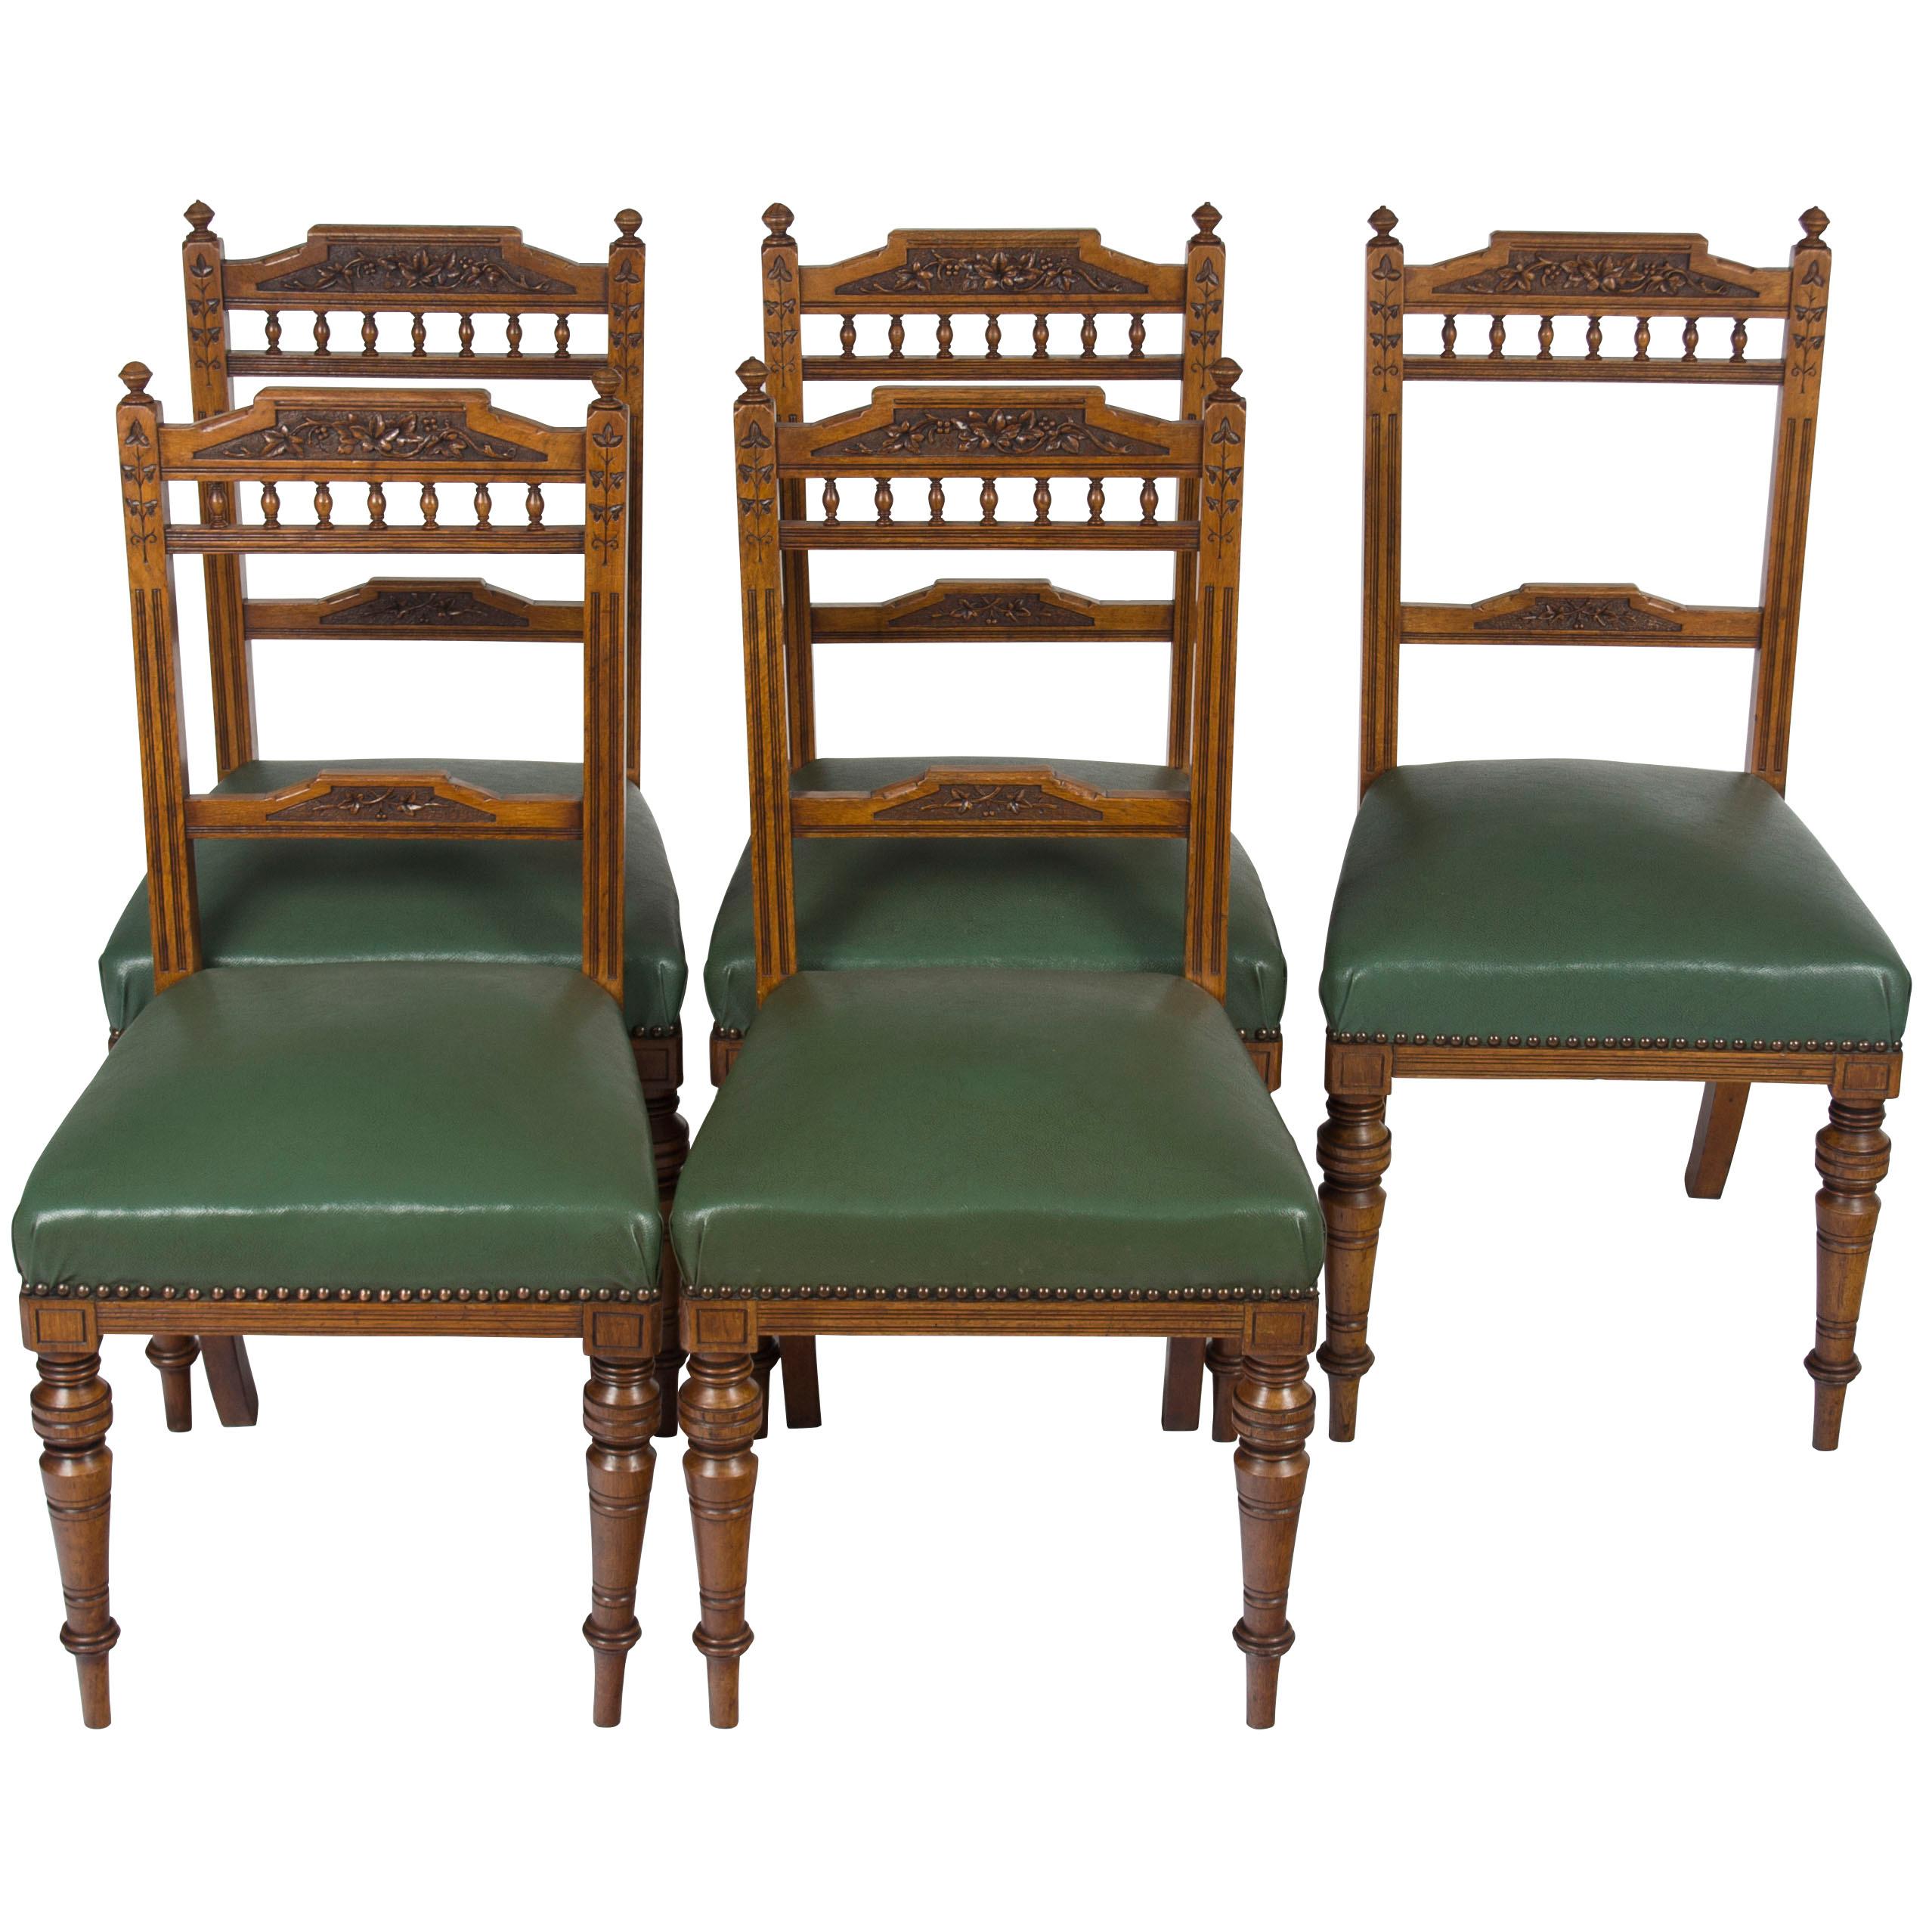 Set of Five Edwardian Carved Oak Leather Seat Dining Room Kitchen Chairs